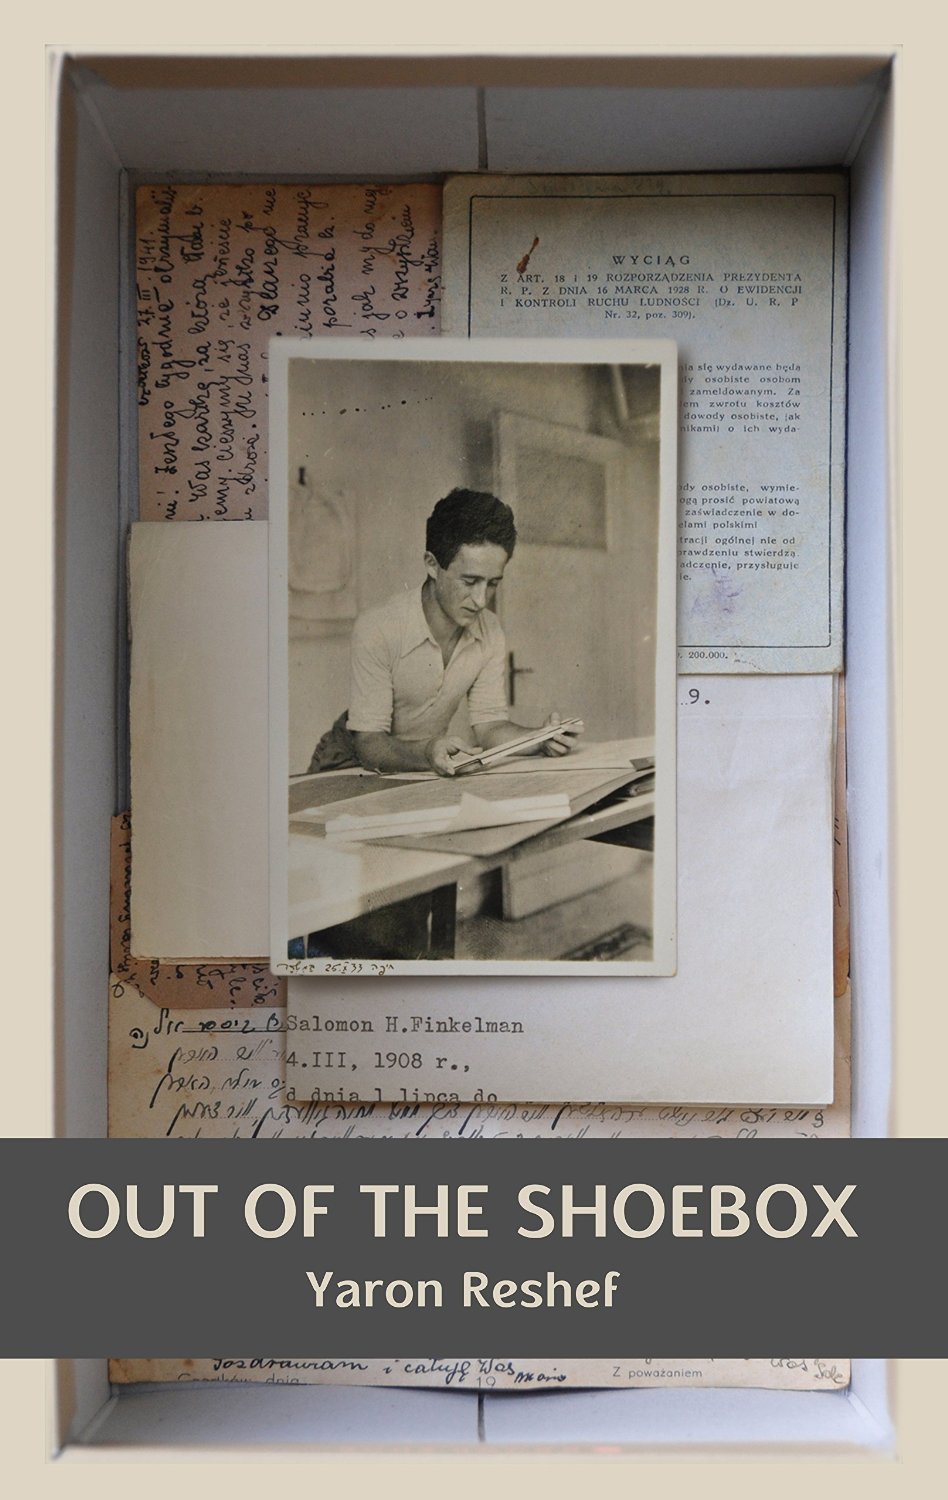 Out of the Shoebox: An Autobiographic Mystery by Yaron Reshef